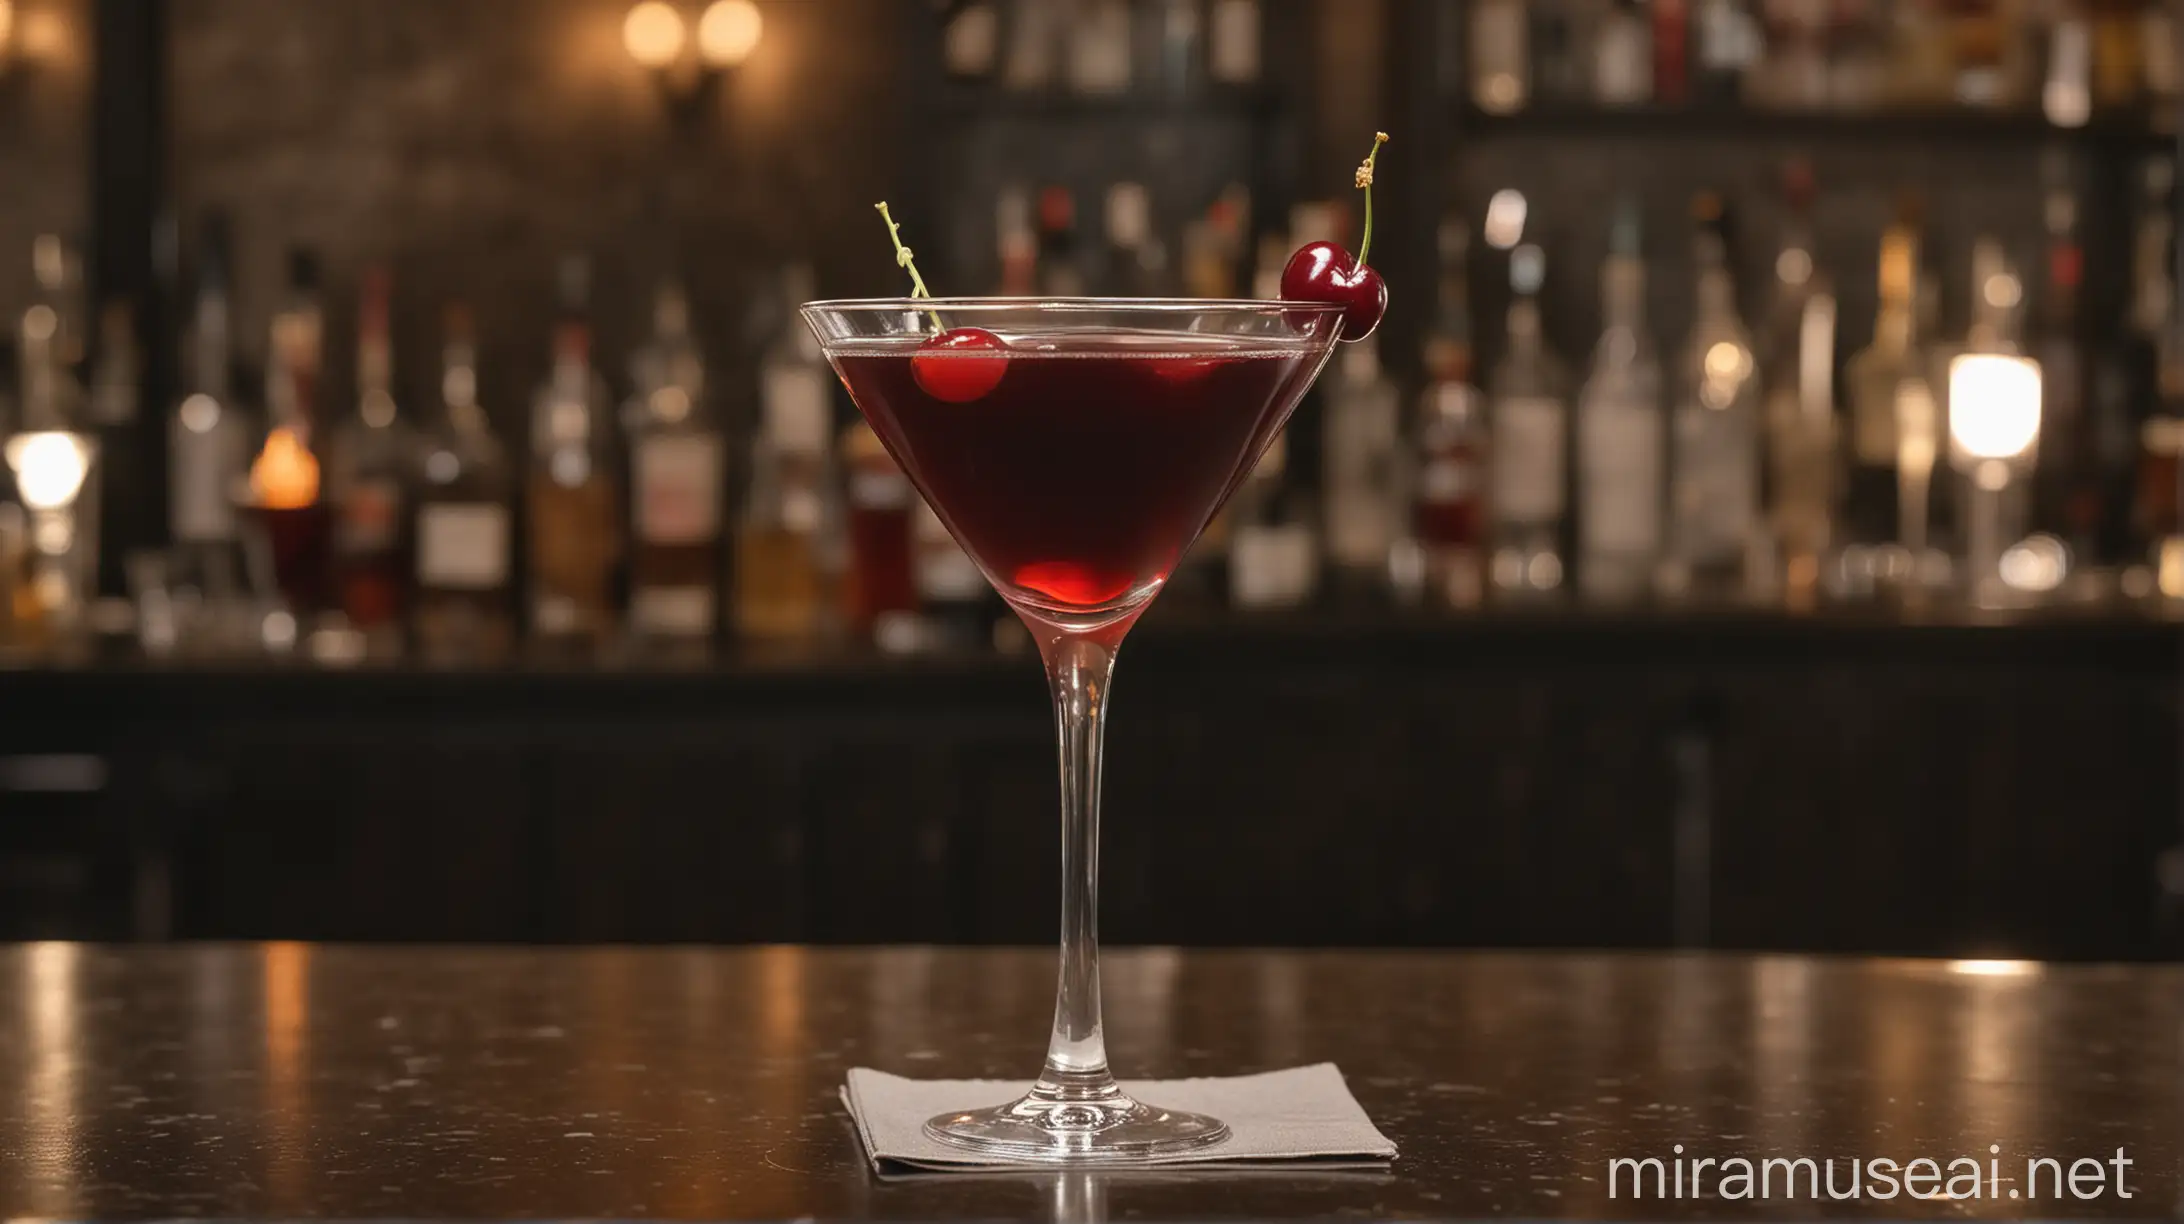 A Manhattan cocktail in a tall Martini glass, served with a cherry garnish. Dark drinks bar in the background.